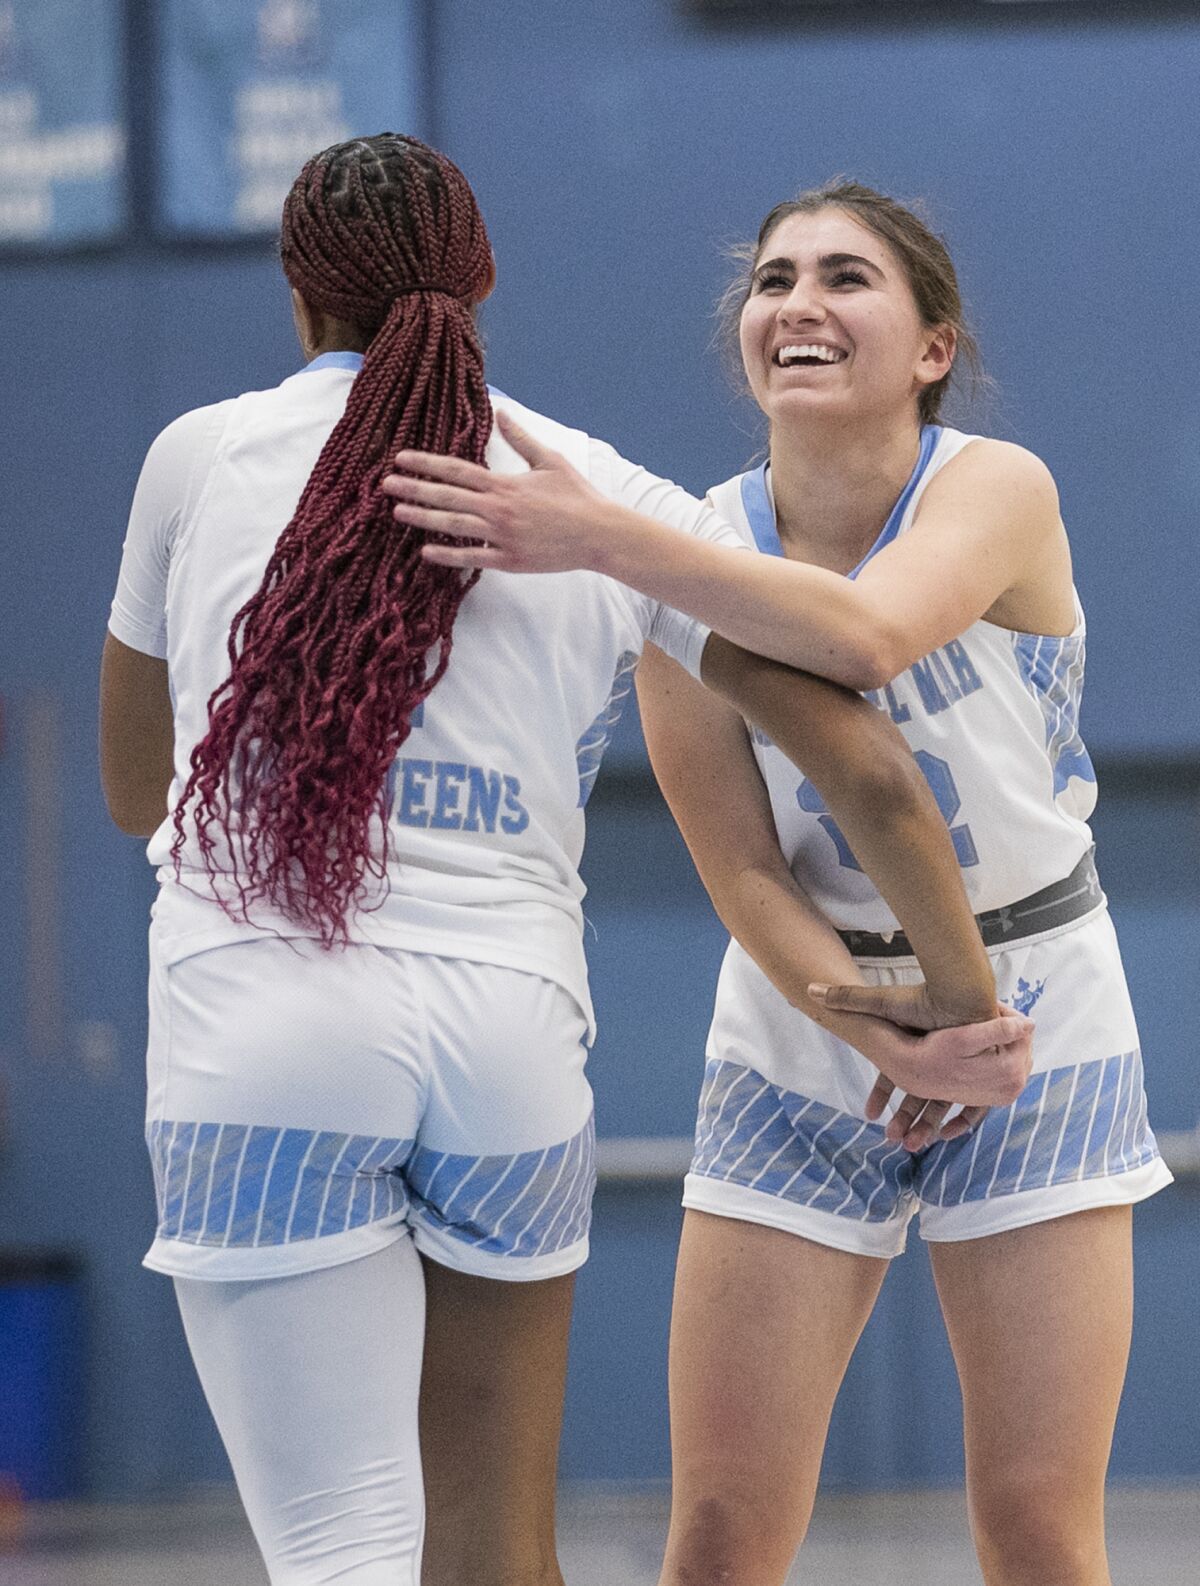 Corona del Mar's Kenedie French-Matthews, left, celebrates with Julia Mork, right, during a game against Newport Harbor.